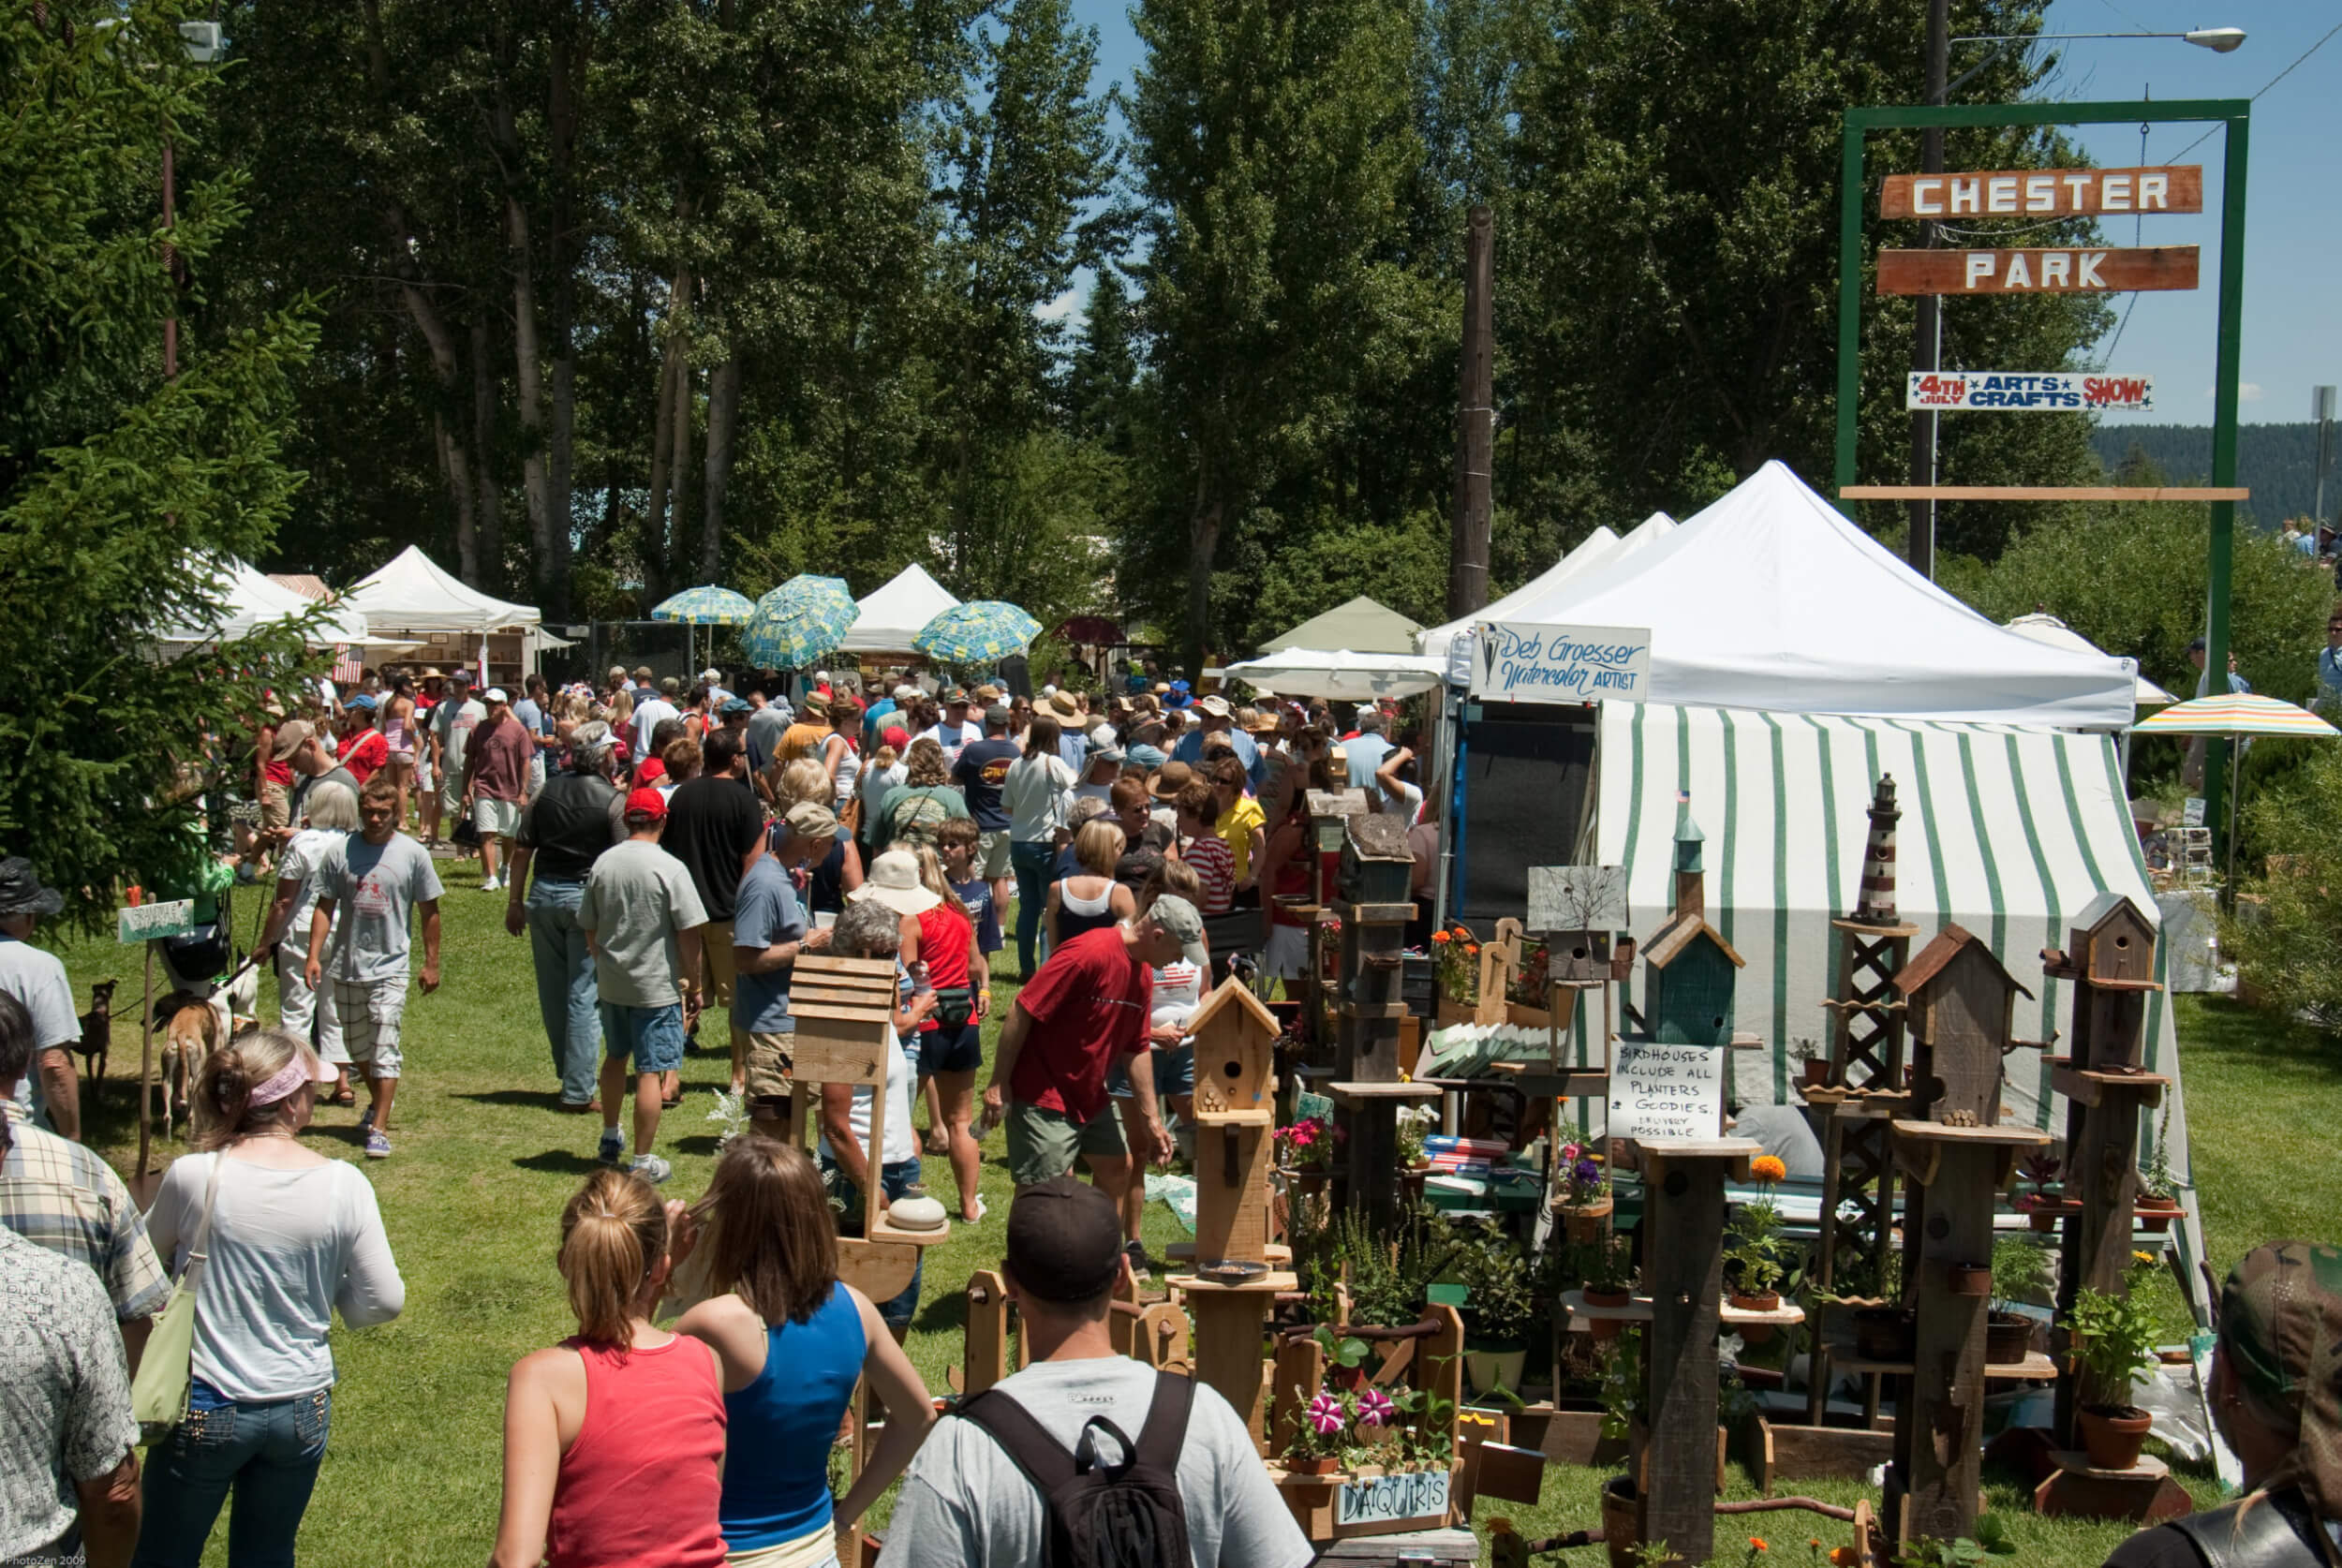 4th oif July Arts & Craft Fair. Vendor Tents and Crowds